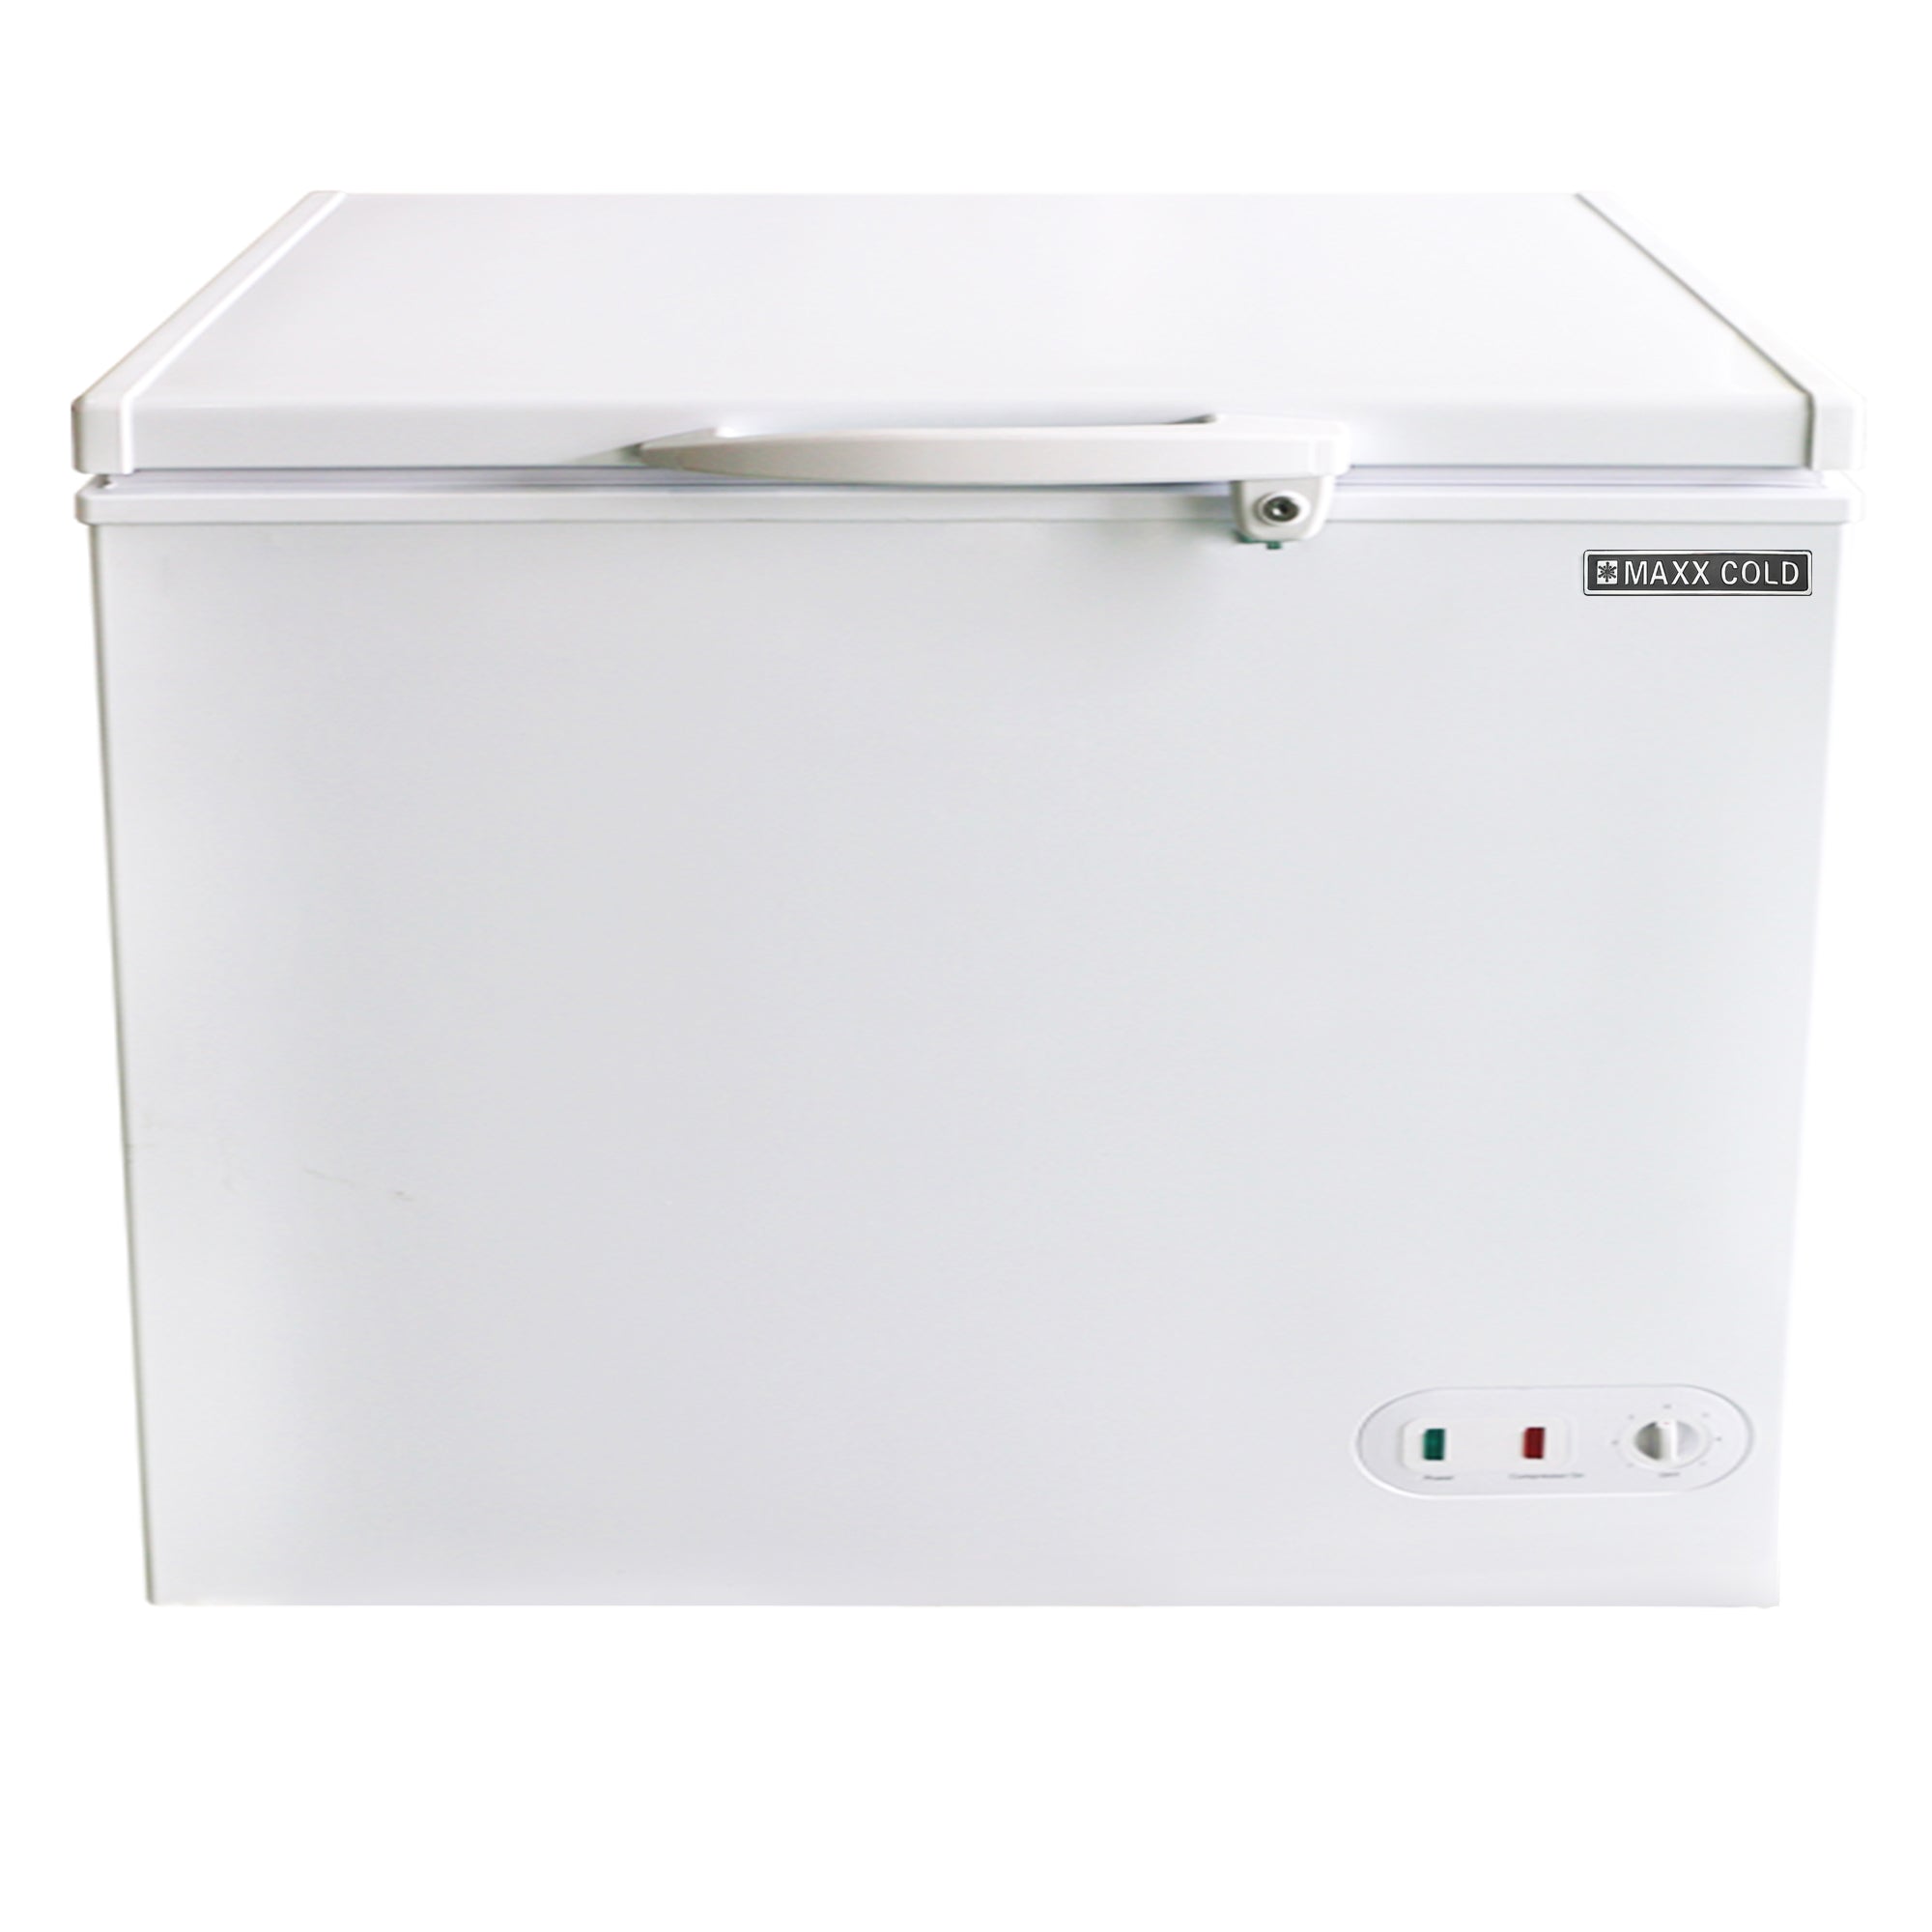 Maxx Cold - MXSH7.0SHC, Maxx Cold Compact Chest Freezer with Solid Top, 37.8"W, 7 cu. ft. Storage Capacity, Locking Lid, Garage Ready, in White